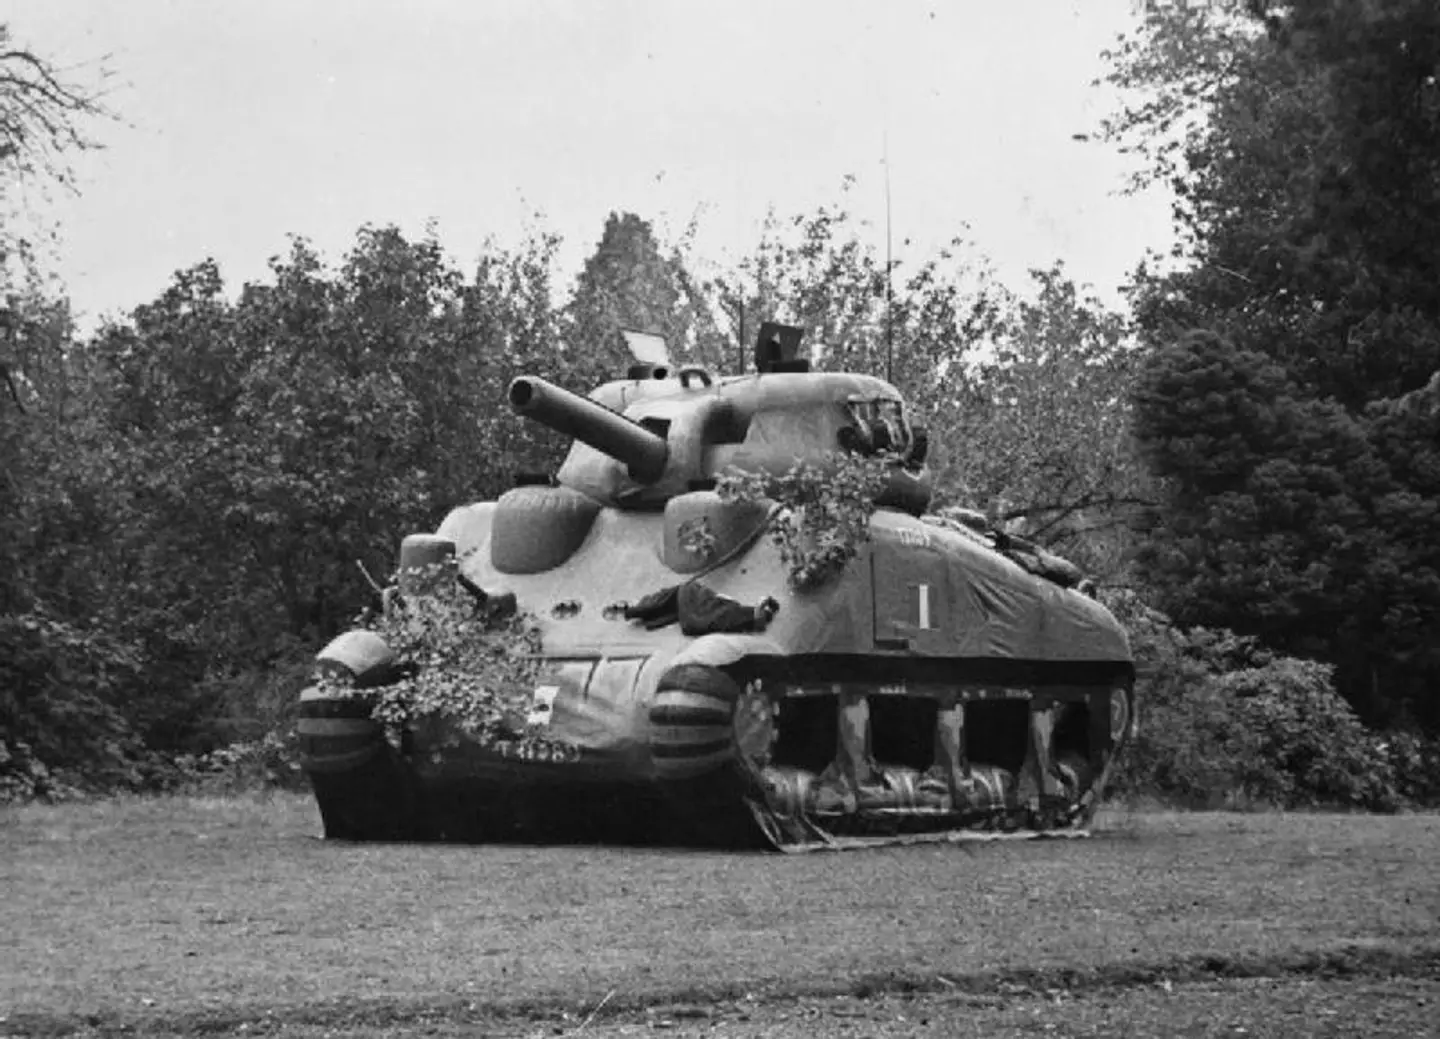 'Ghost army' tactics were used throughout World War Two to mislead Nazi forces.